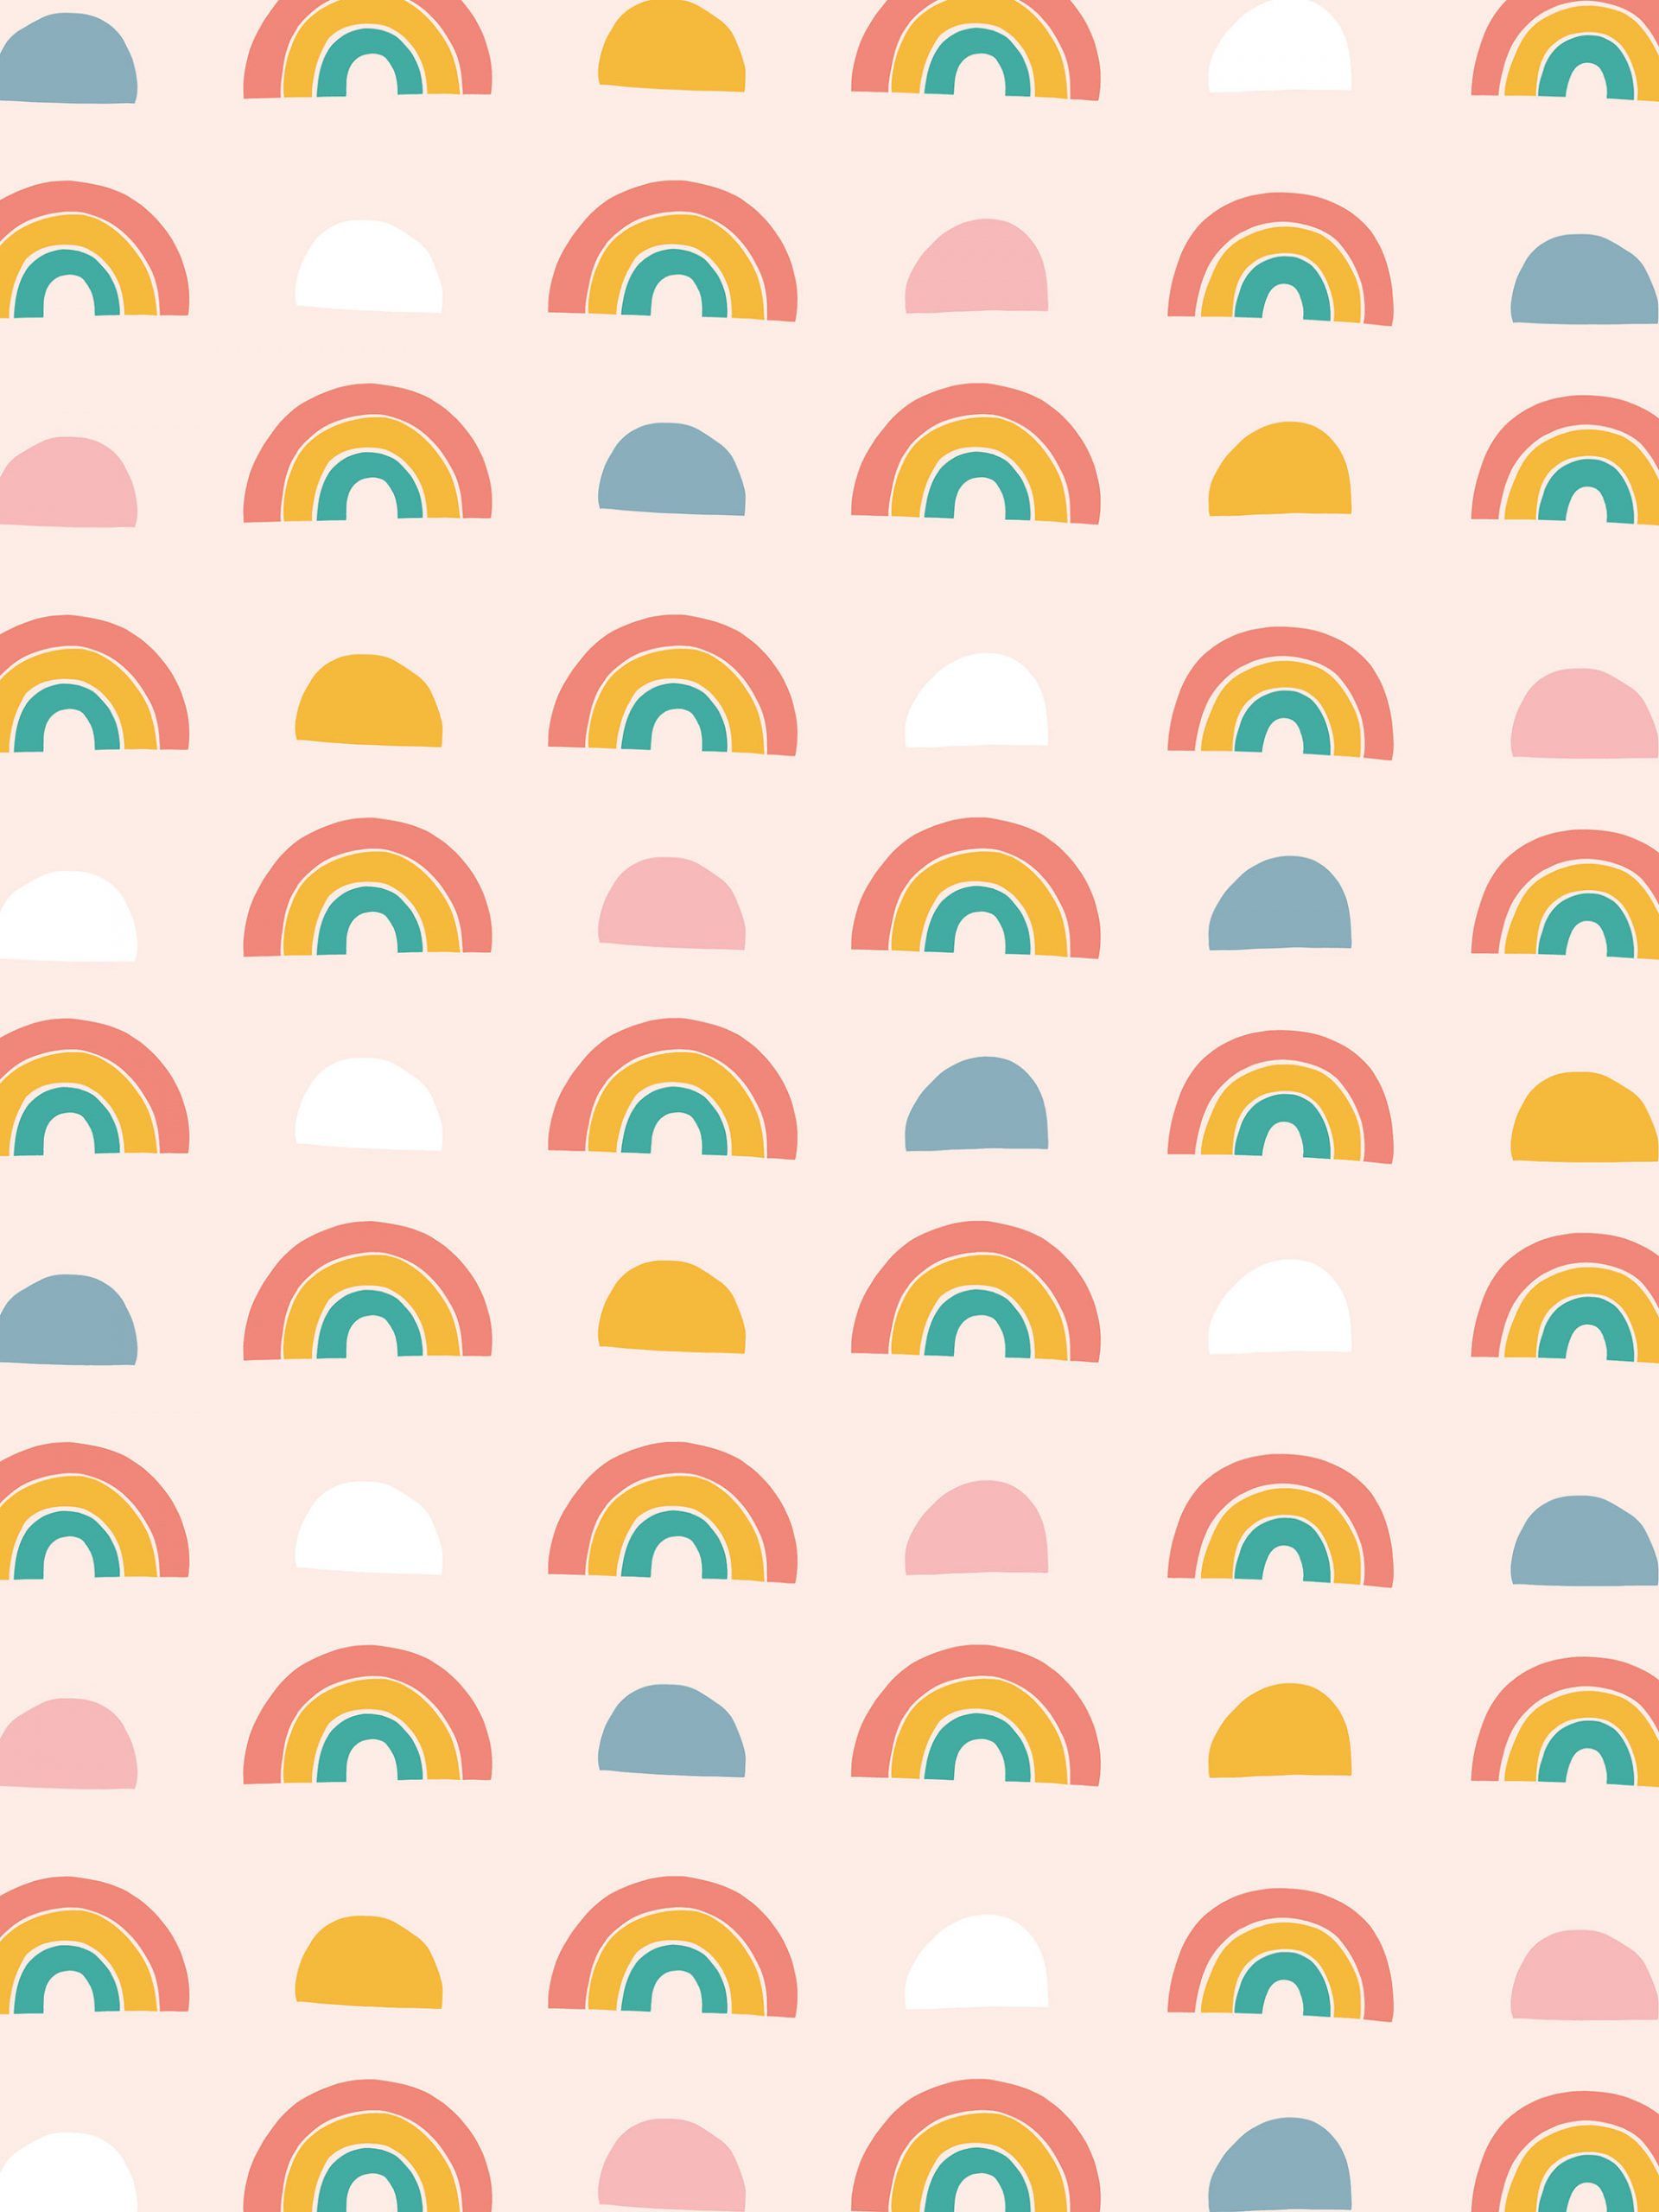 Rainbow patterned desktop tablet and phone wallpaper in 2020